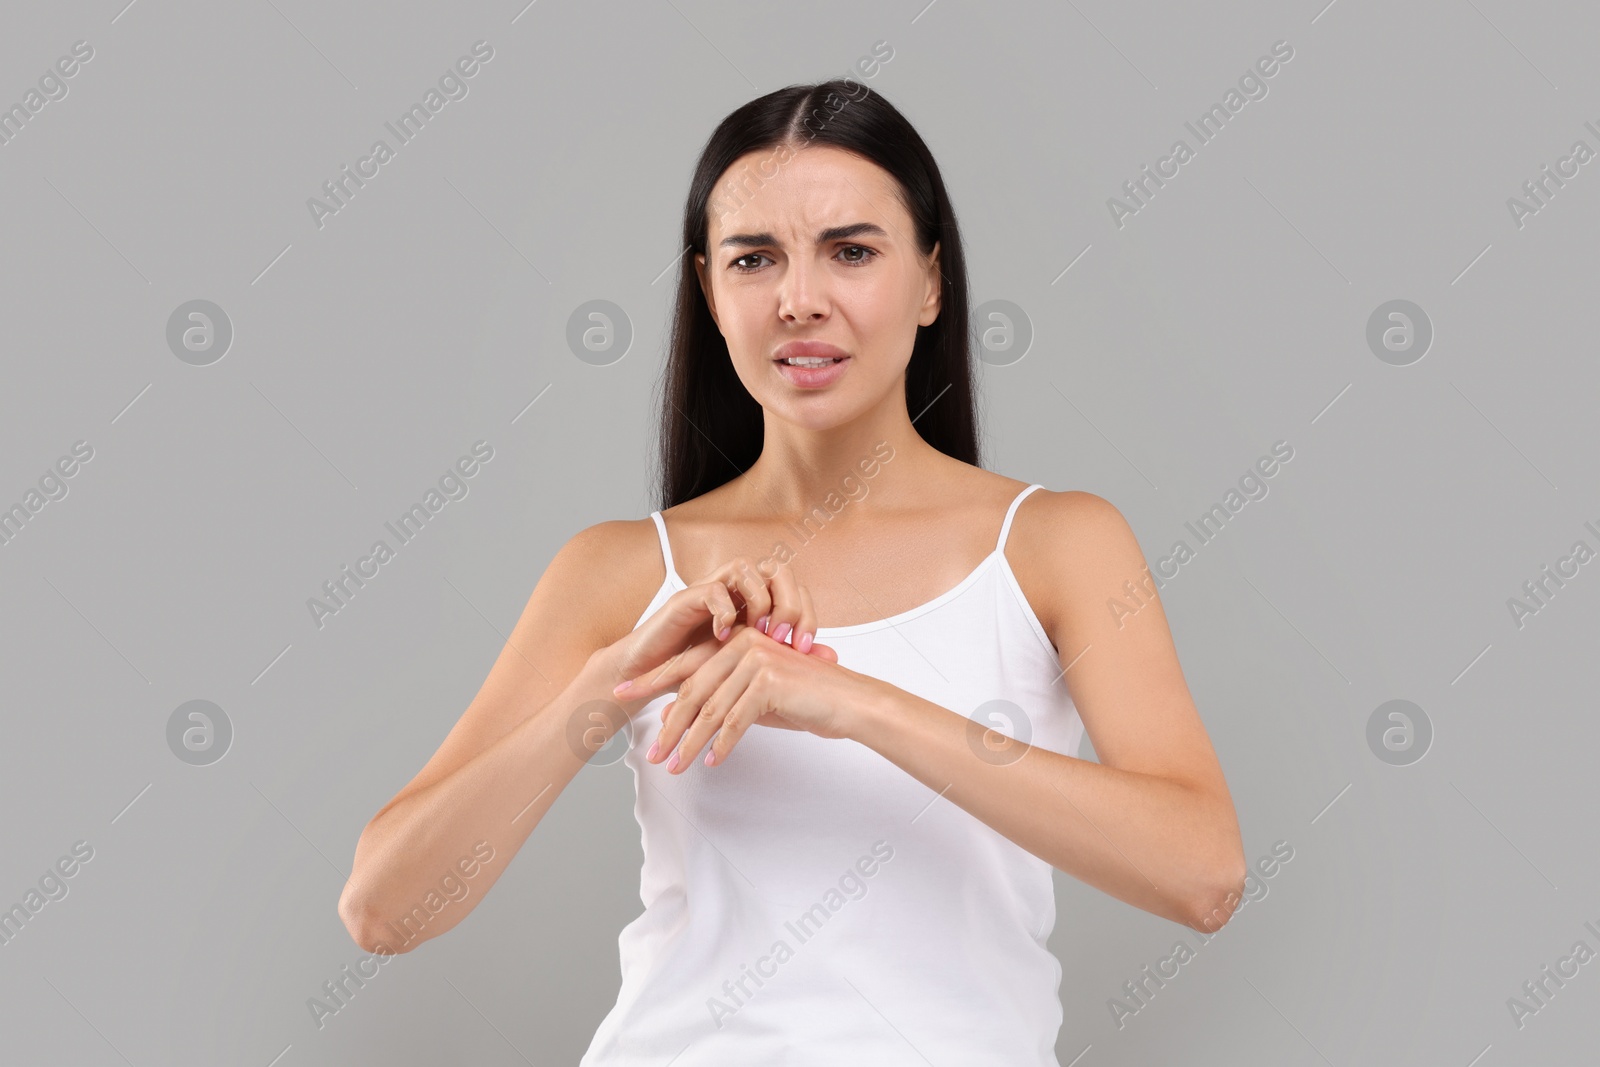 Photo of Suffering from allergy. Young woman scratching her hand on light grey background